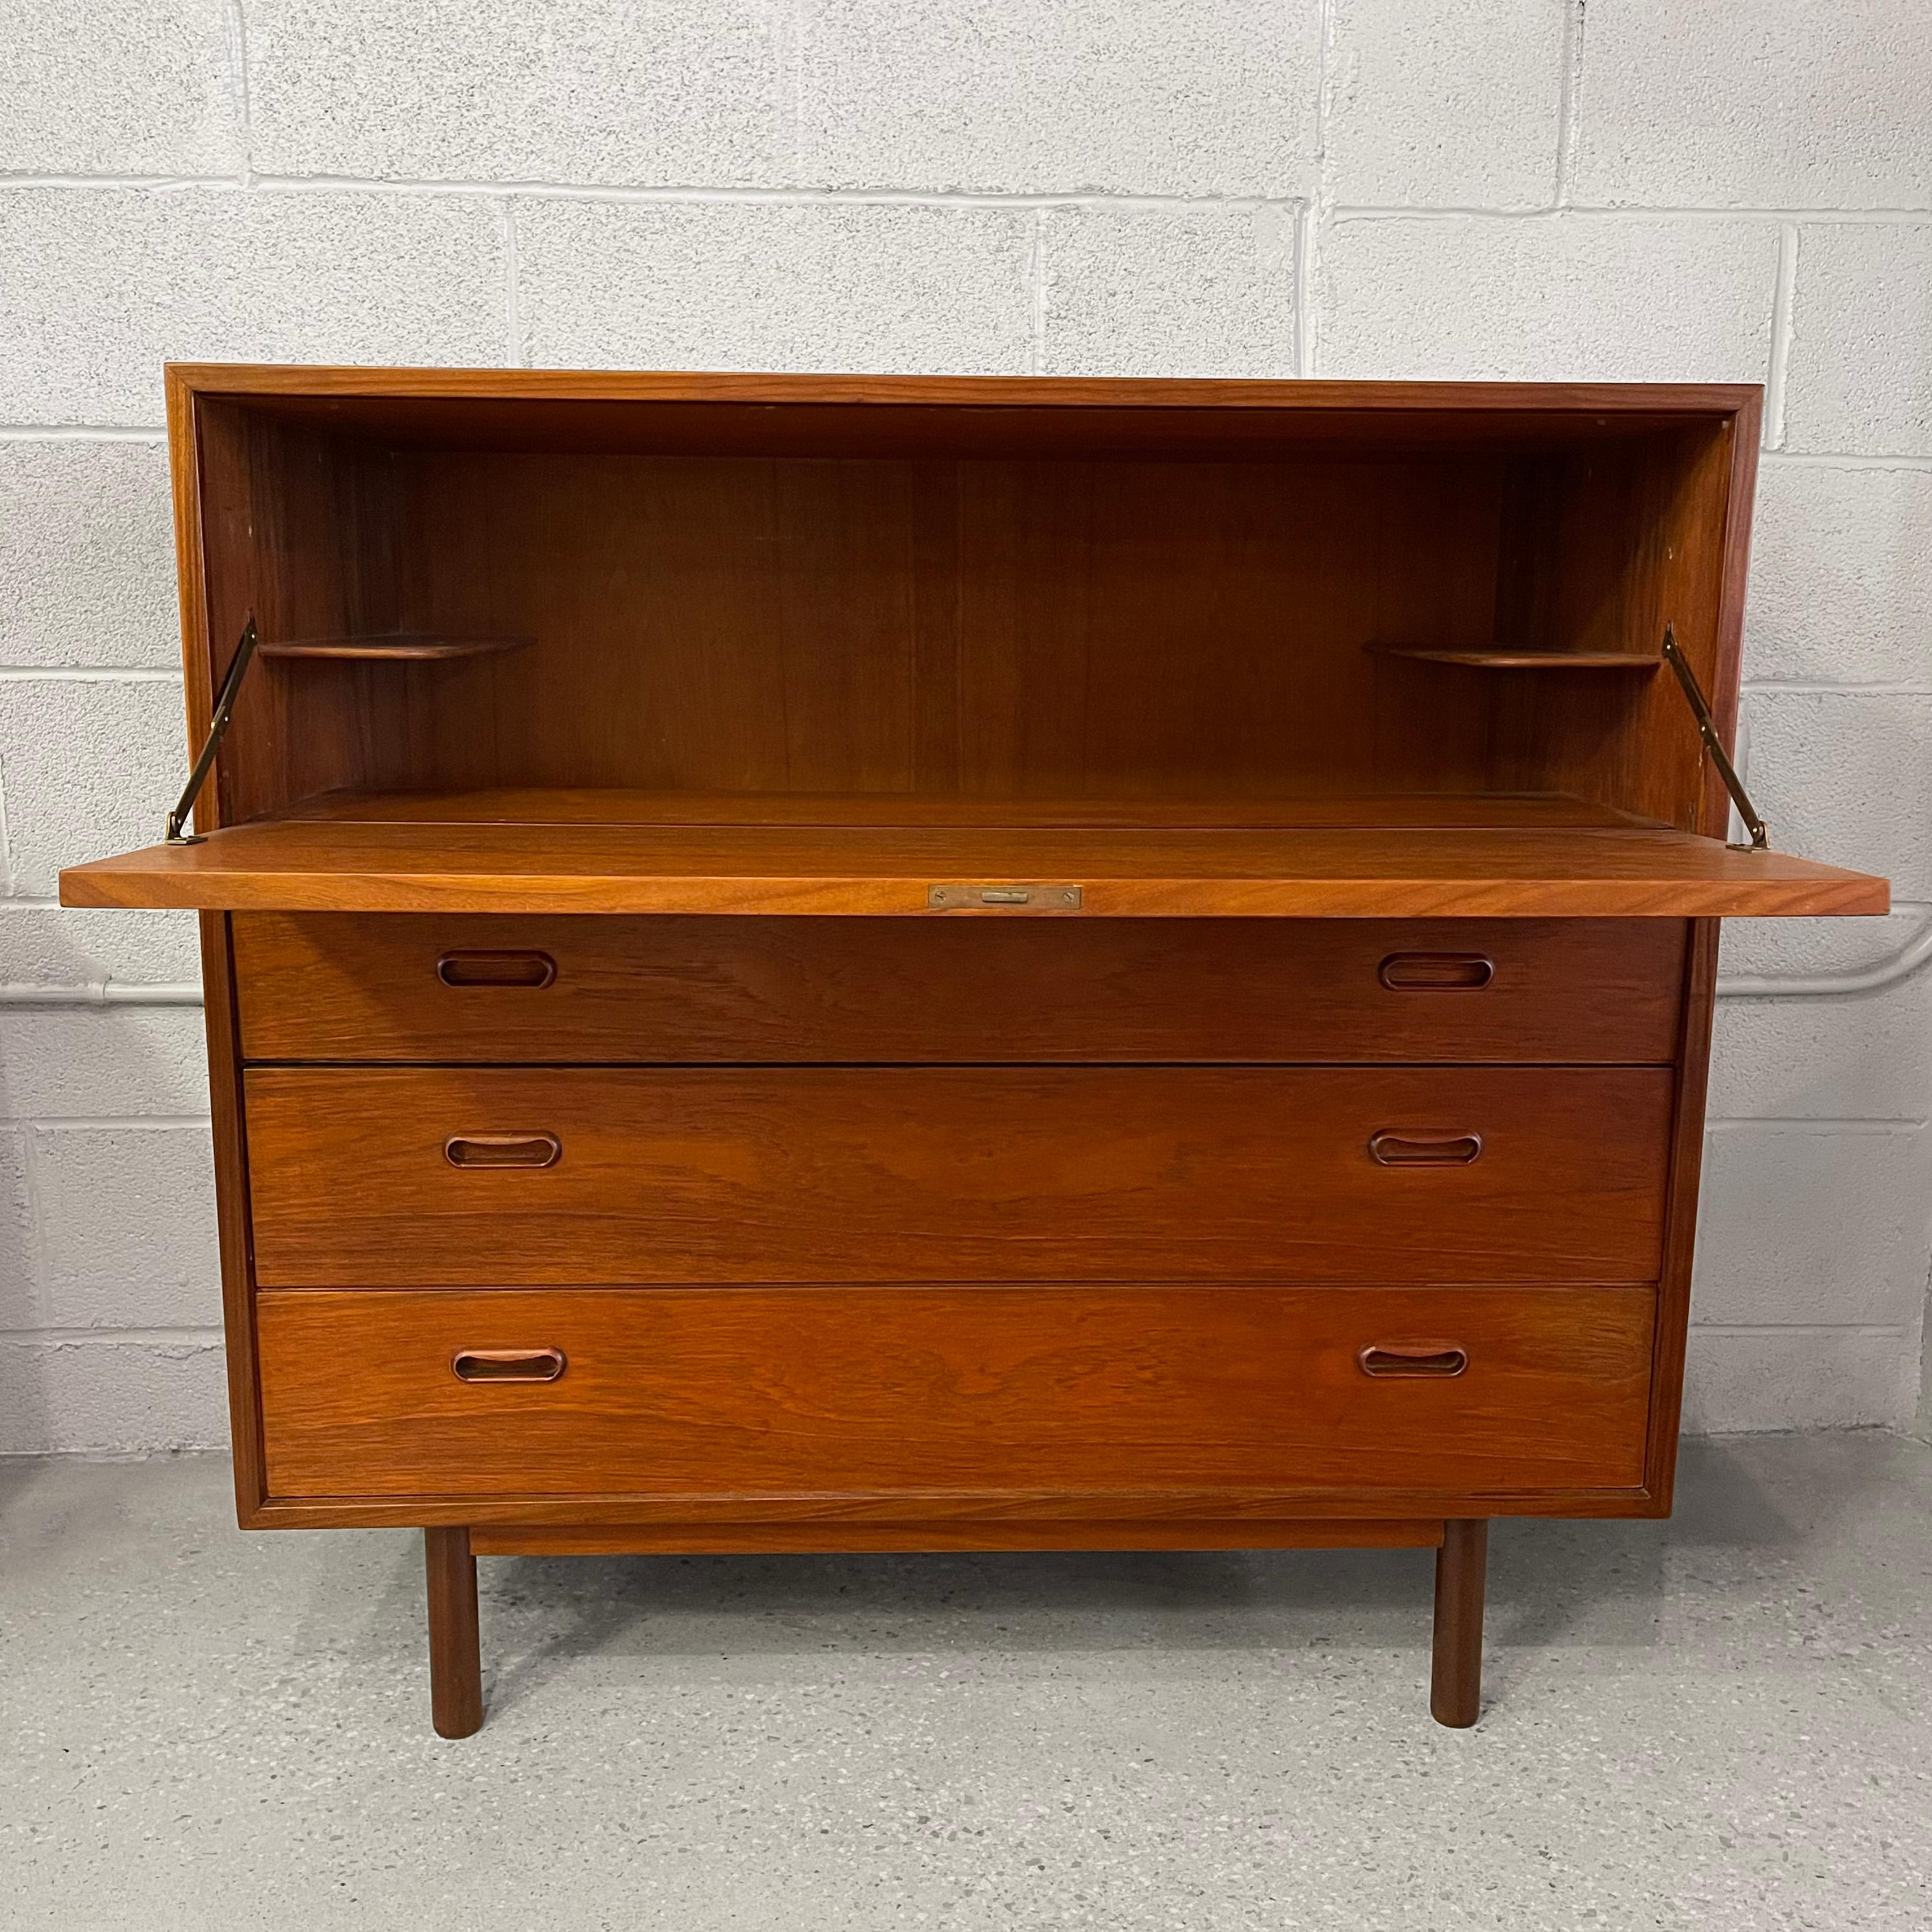 Danish modern, teak, secretary desk cabinet features a lockable, pull-down desk ledge at 26 inches height with 2 drawers and a flap level right below the desk to slide in files or books. The desk offers a comforatable amount of work space that can